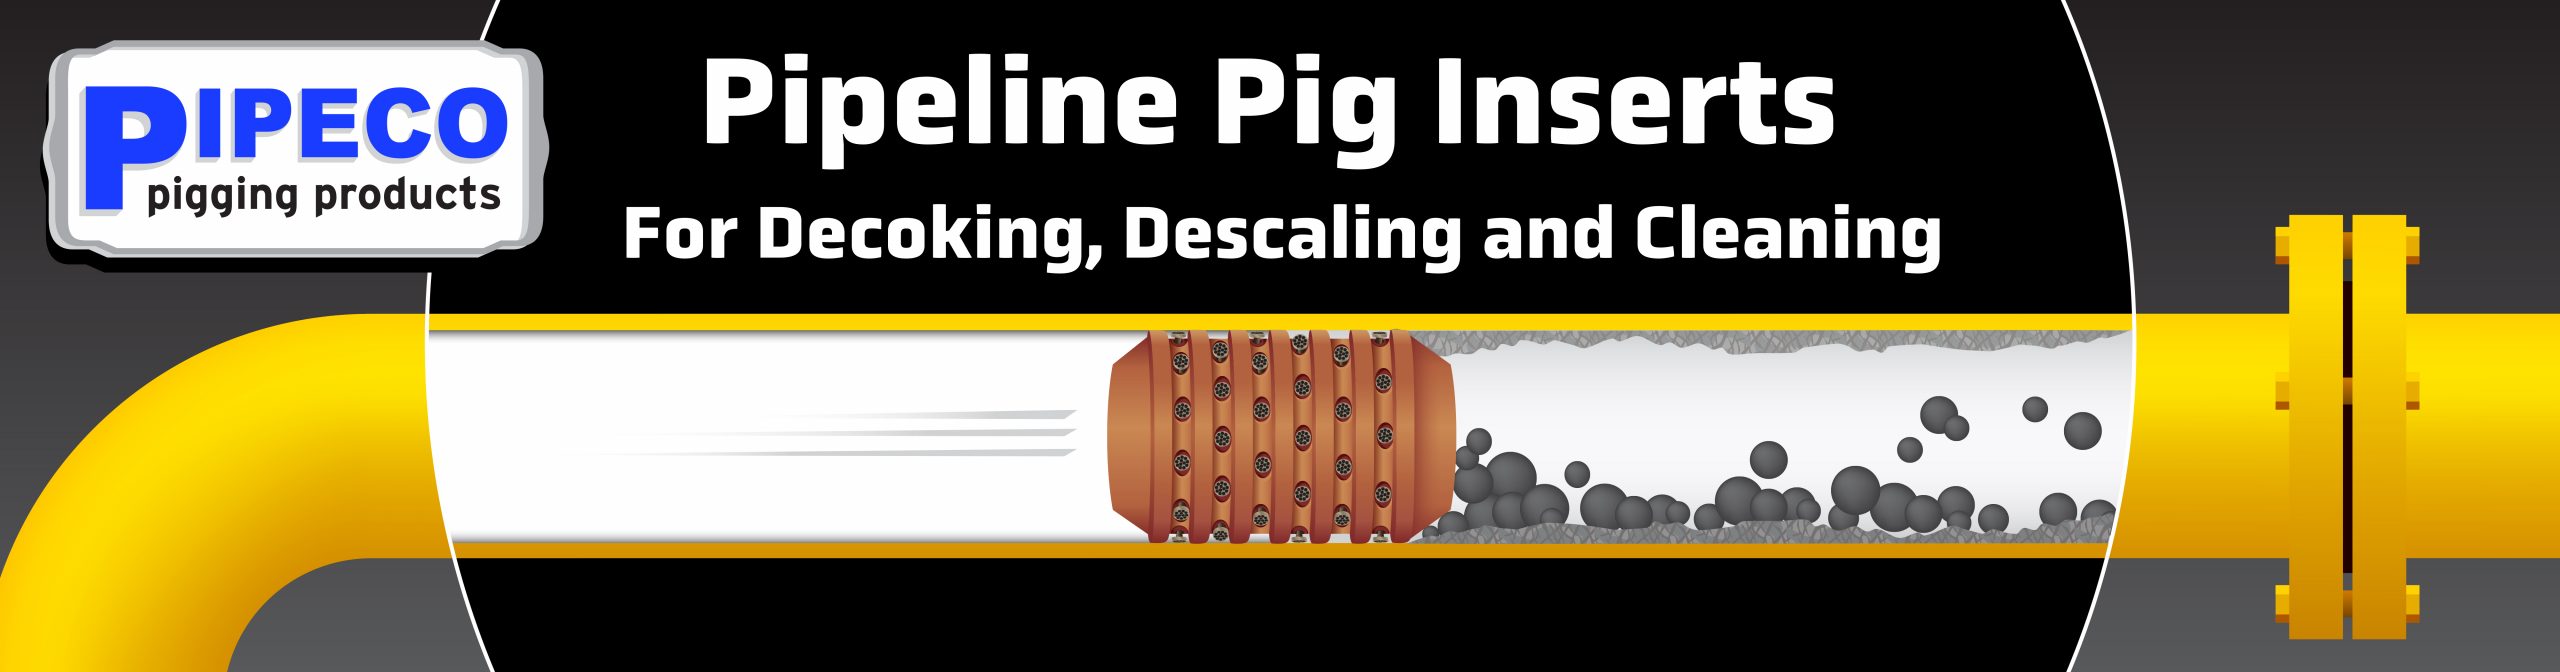 pipeline pigging inserts - INS Products